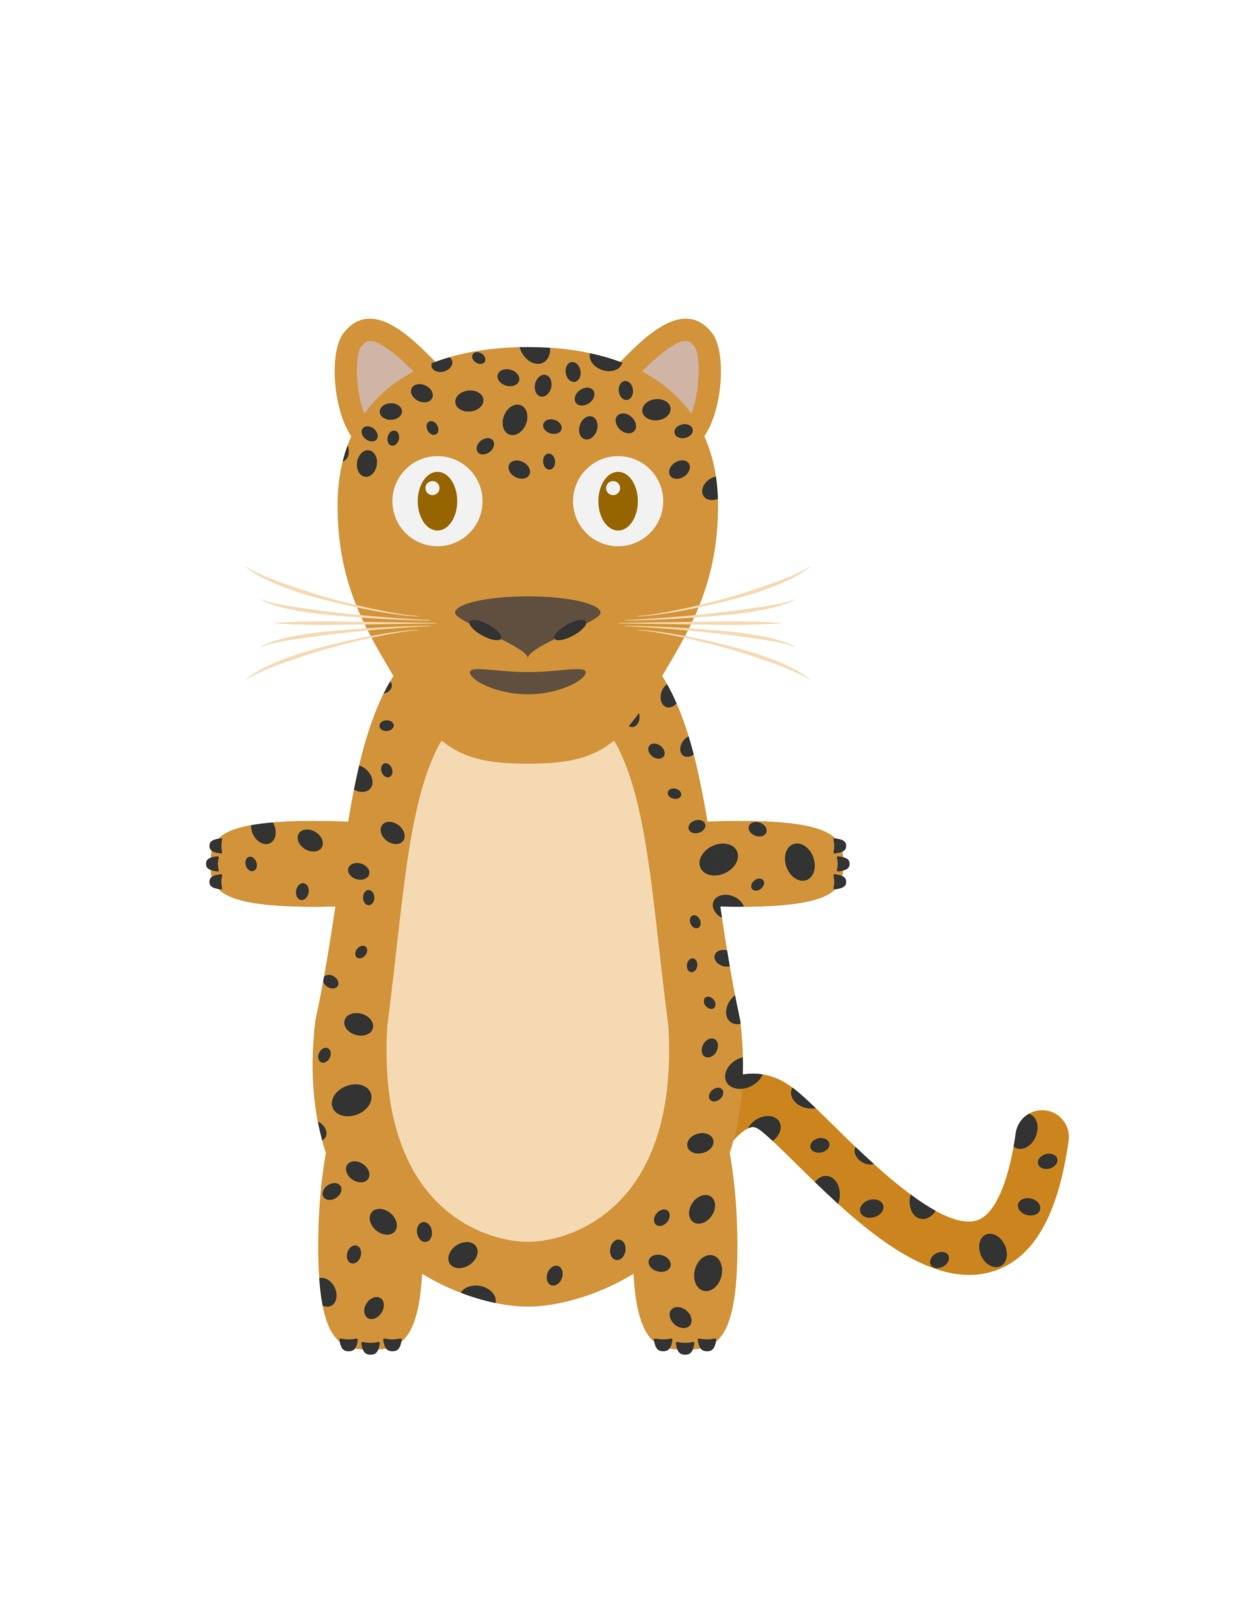 Leopard illustration as a funny character. Wild and dangerous mammal with spotted skin. Small cartoon creature, isolated object in flat design on white background.